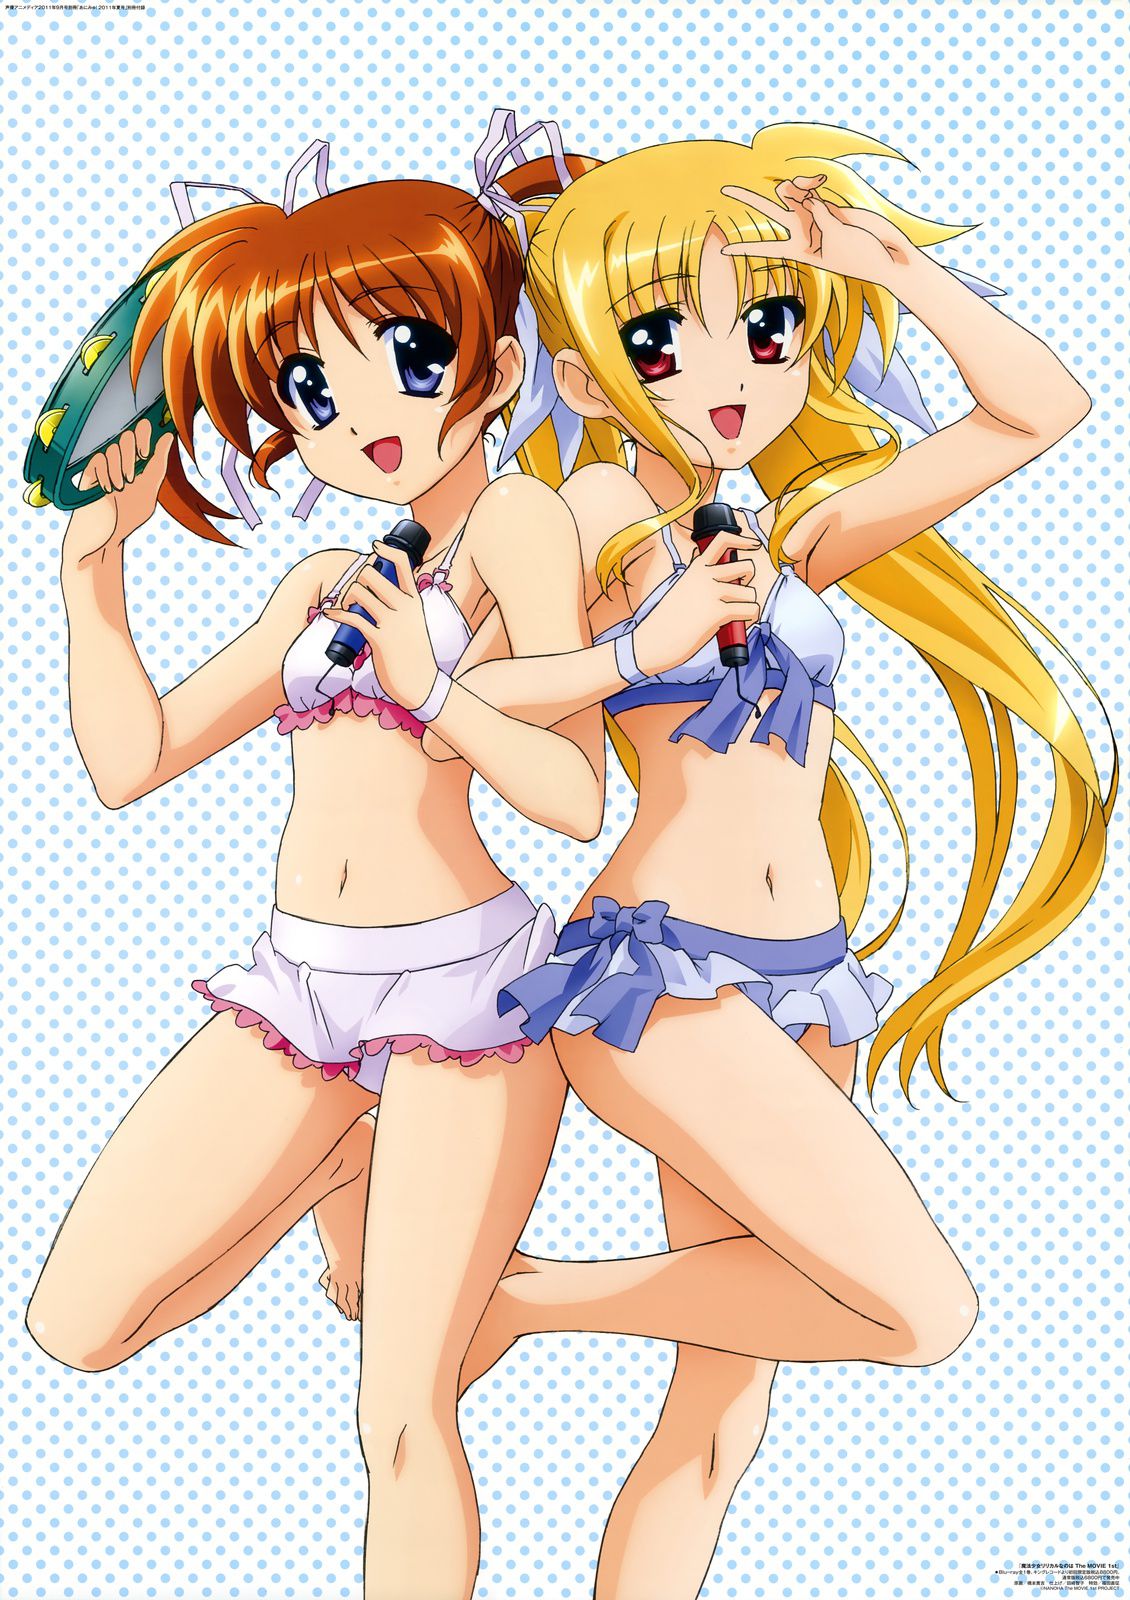 [Mahou Shoujo Lyrical Nanoha] is erotic image that you know the appeal of naughty 5